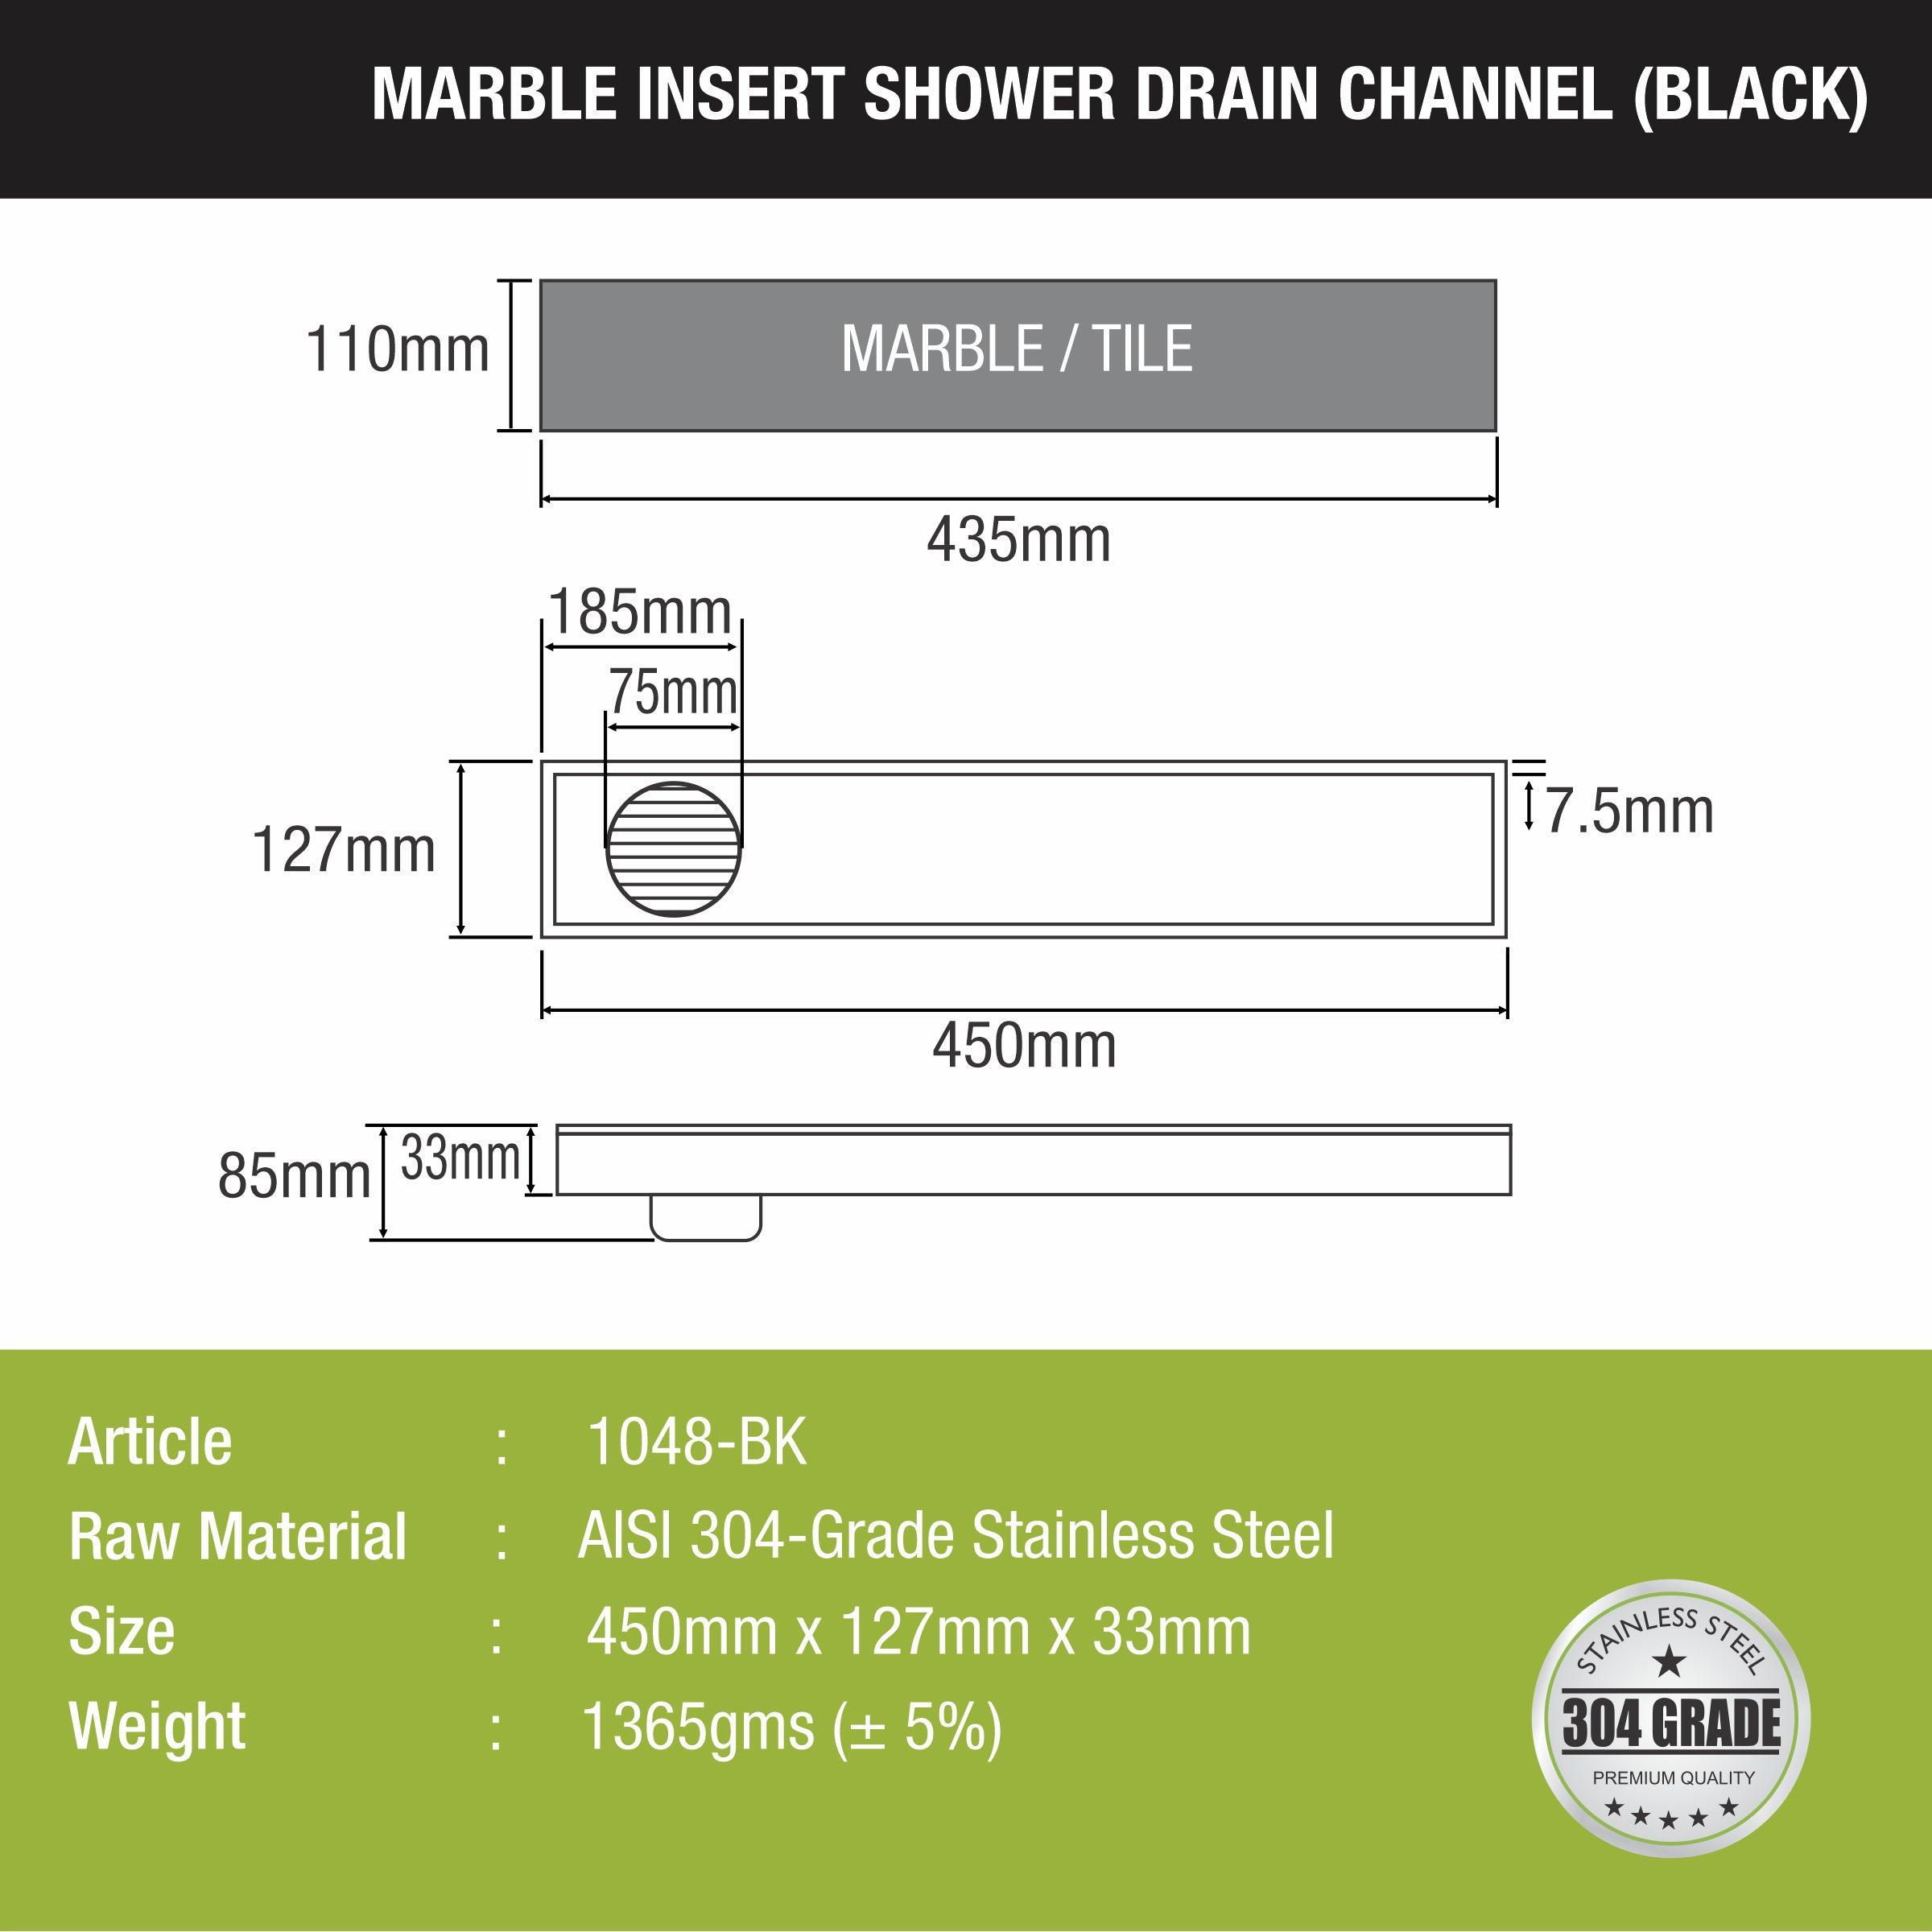 Marble Insert Shower Drain Channel - Black (18 x 5 Inches) size and measurement